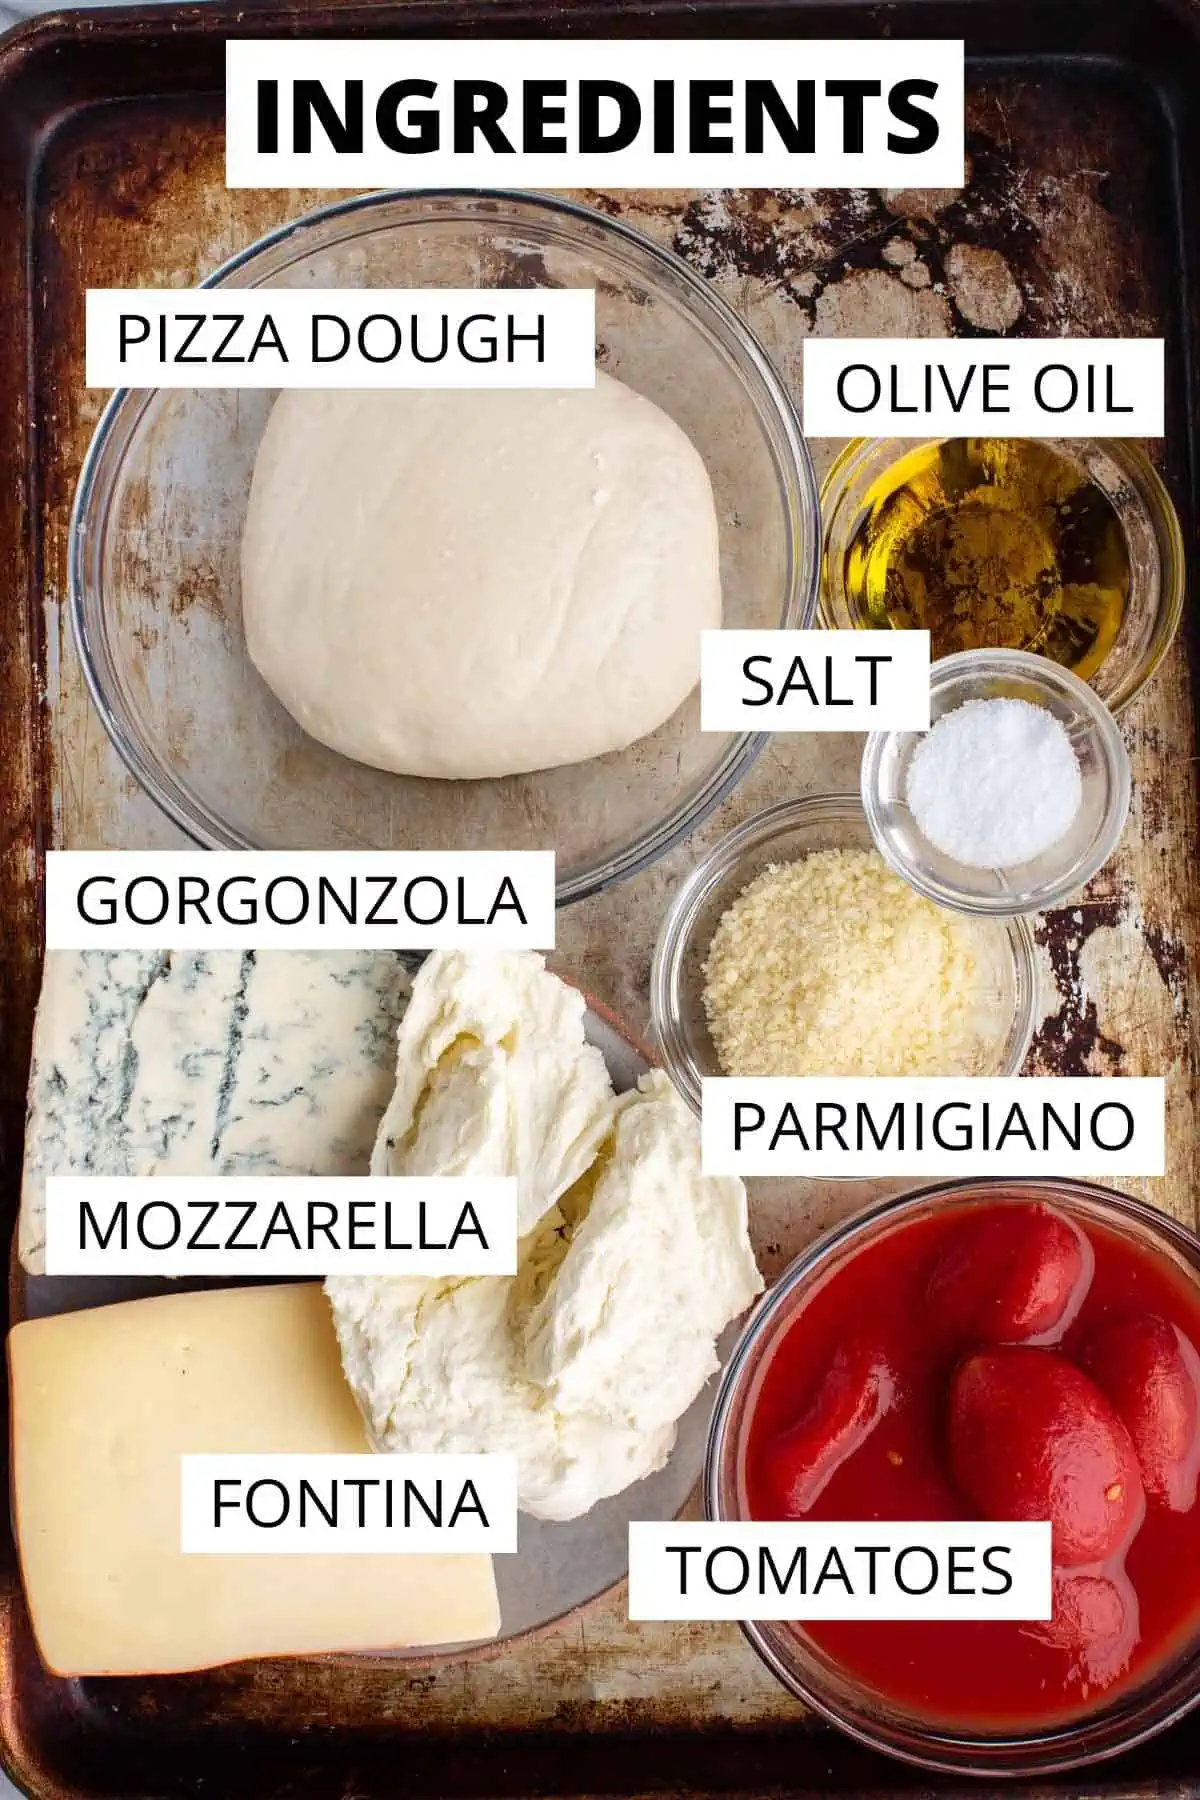 A graphic image with labeled Quattro Formaggi ingredients.